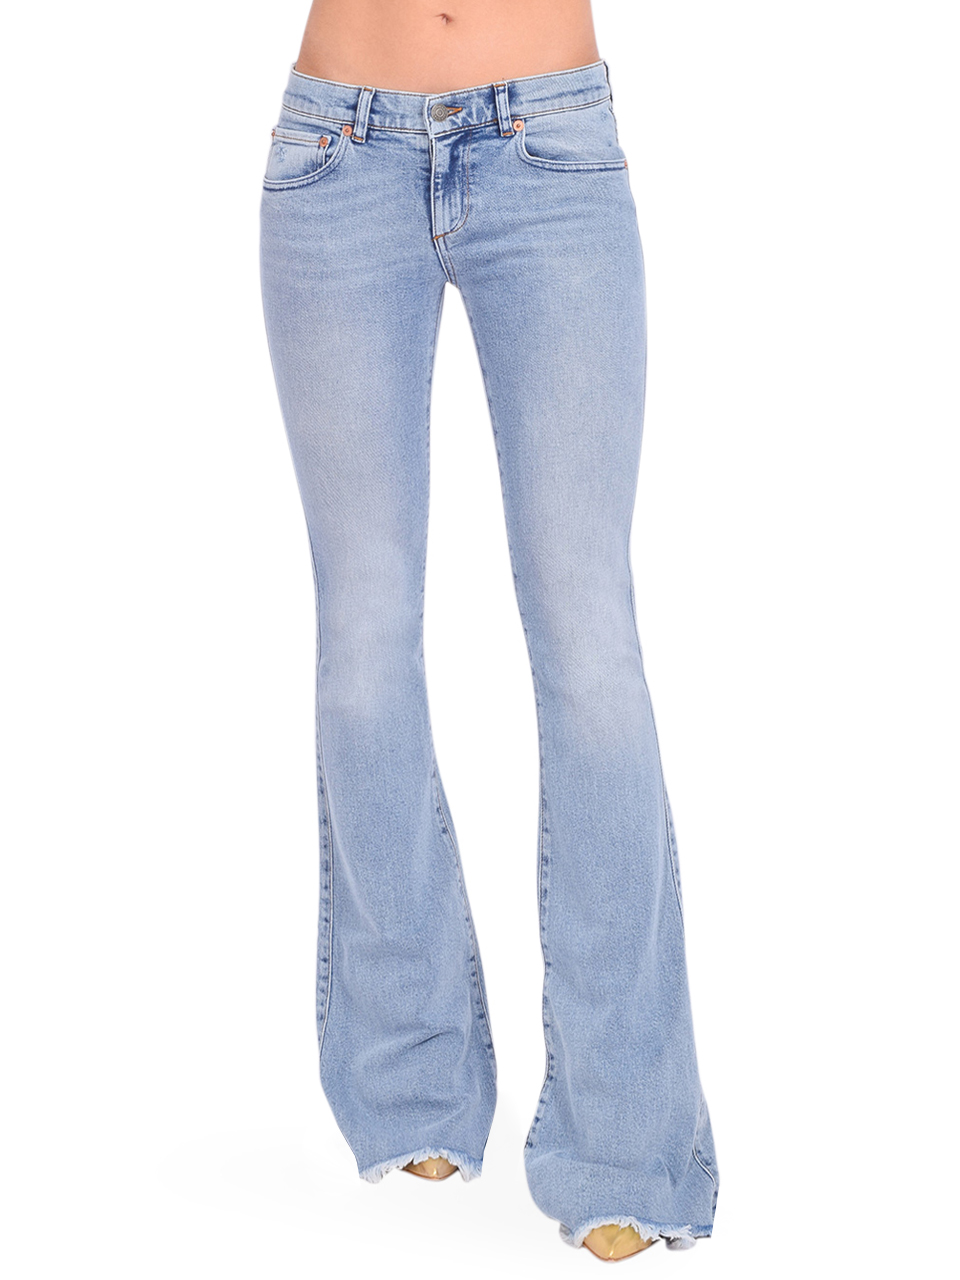 SER.O.YA Demi Jeans in Sorrento Blue Front View 